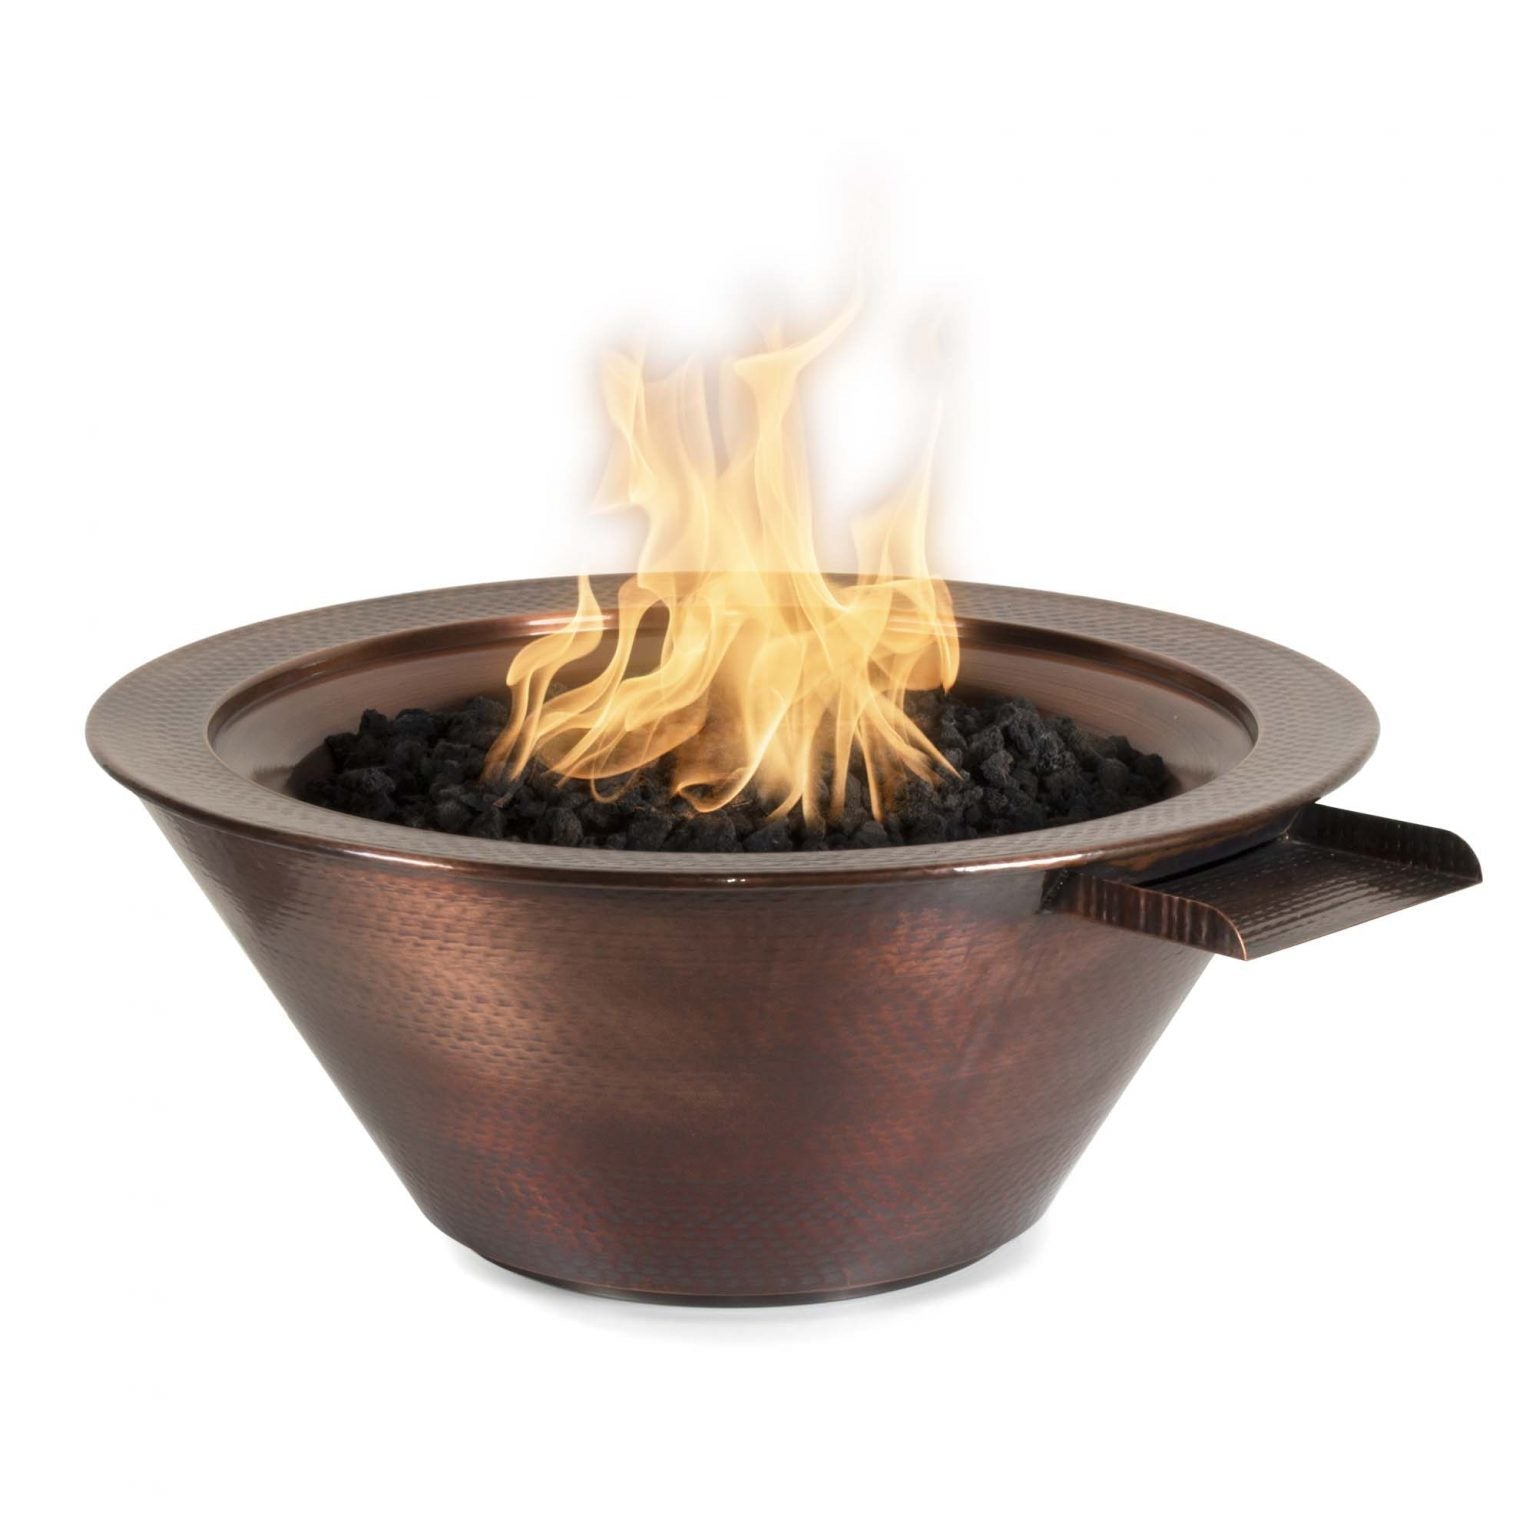 The Outdoor Plus Cazo Hammered Copper Fire and Water Bowl Lit